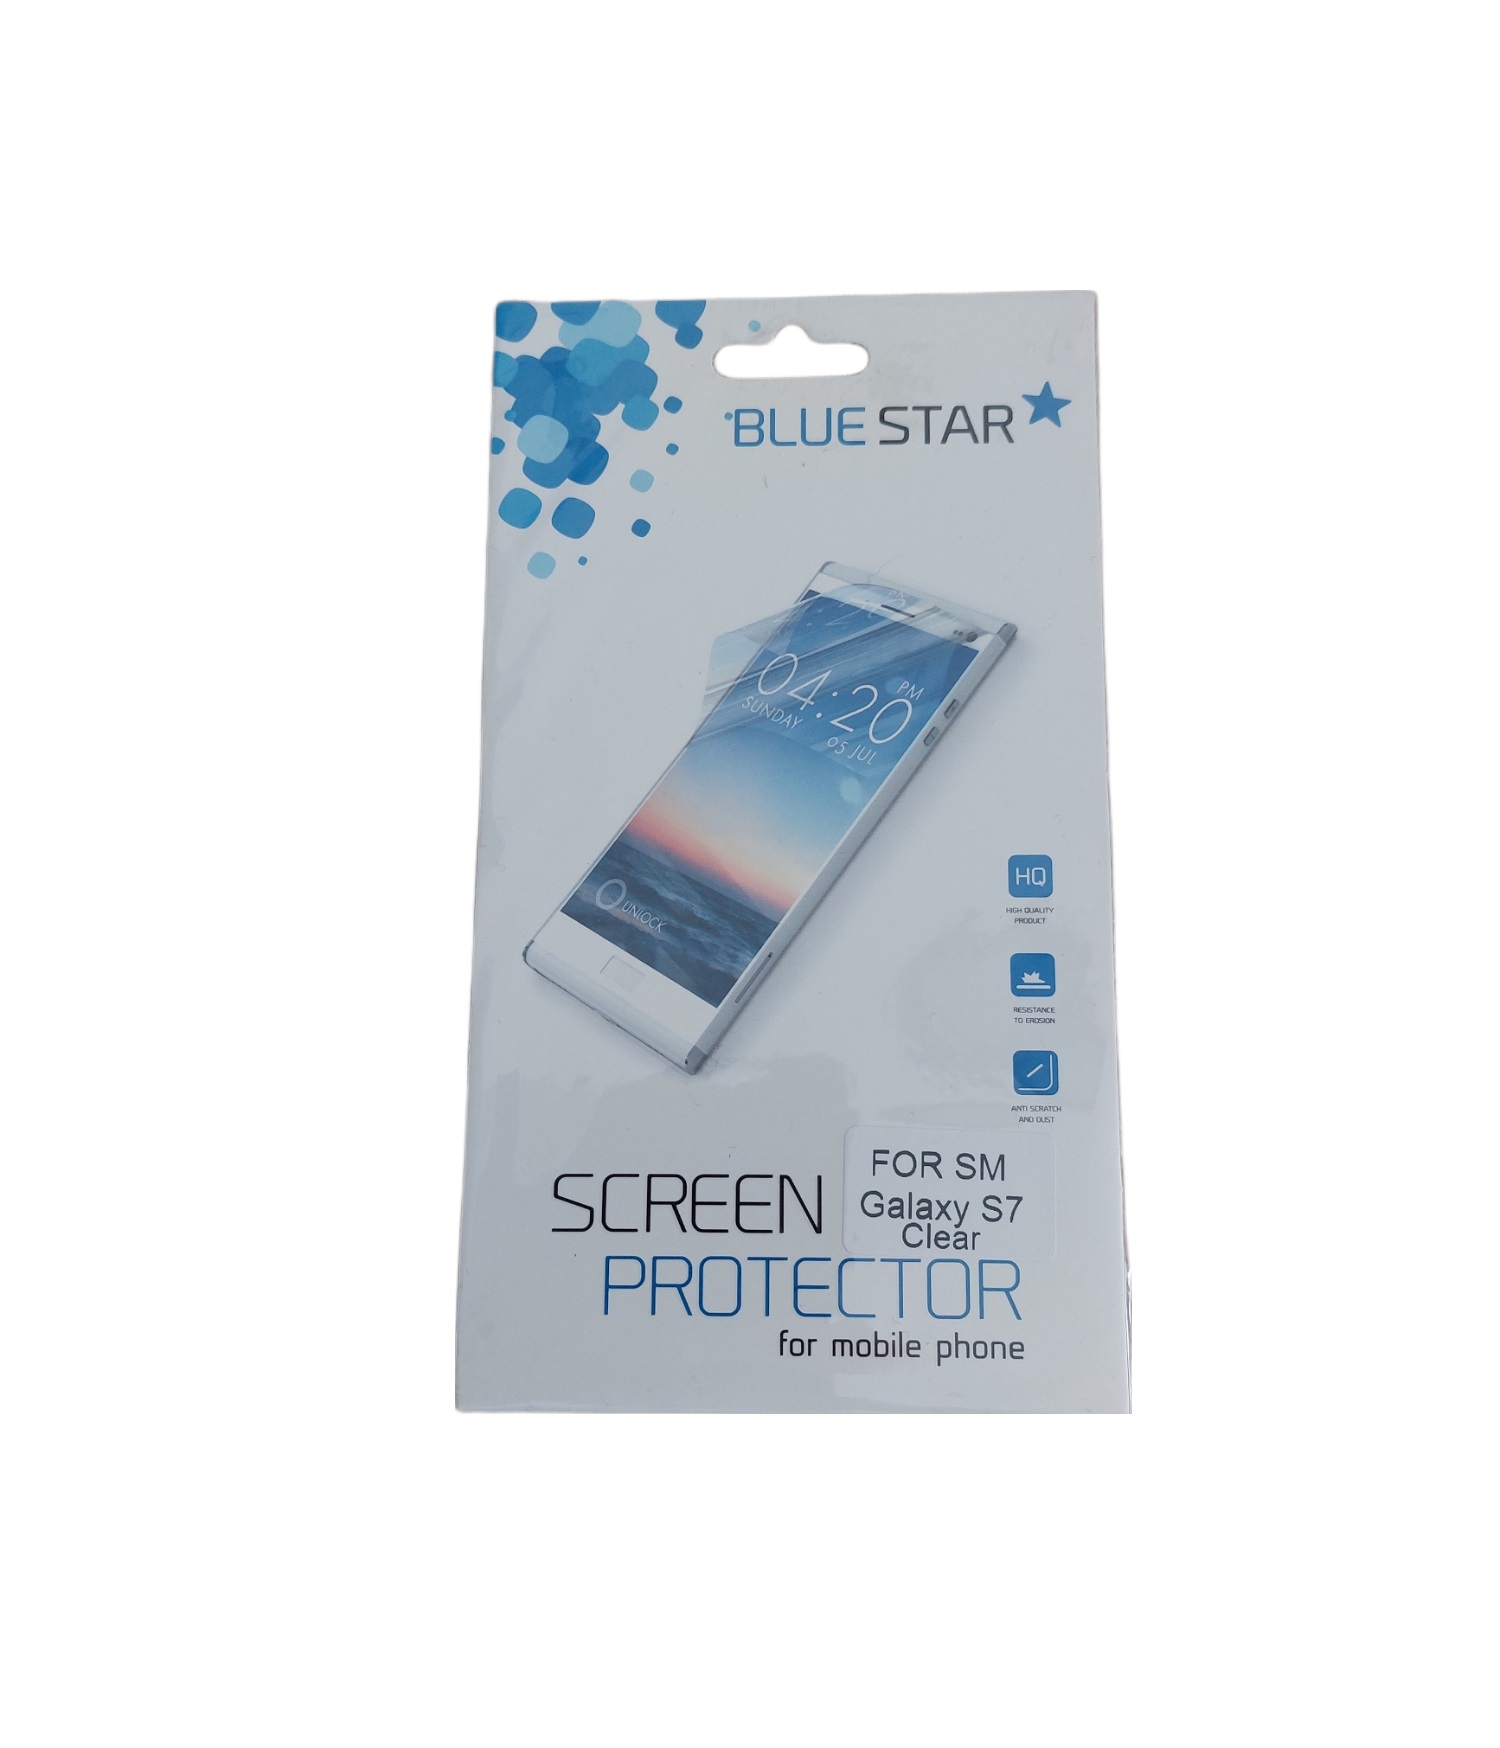 Screen protector for Samsung Galaxy S7 SM-G930F